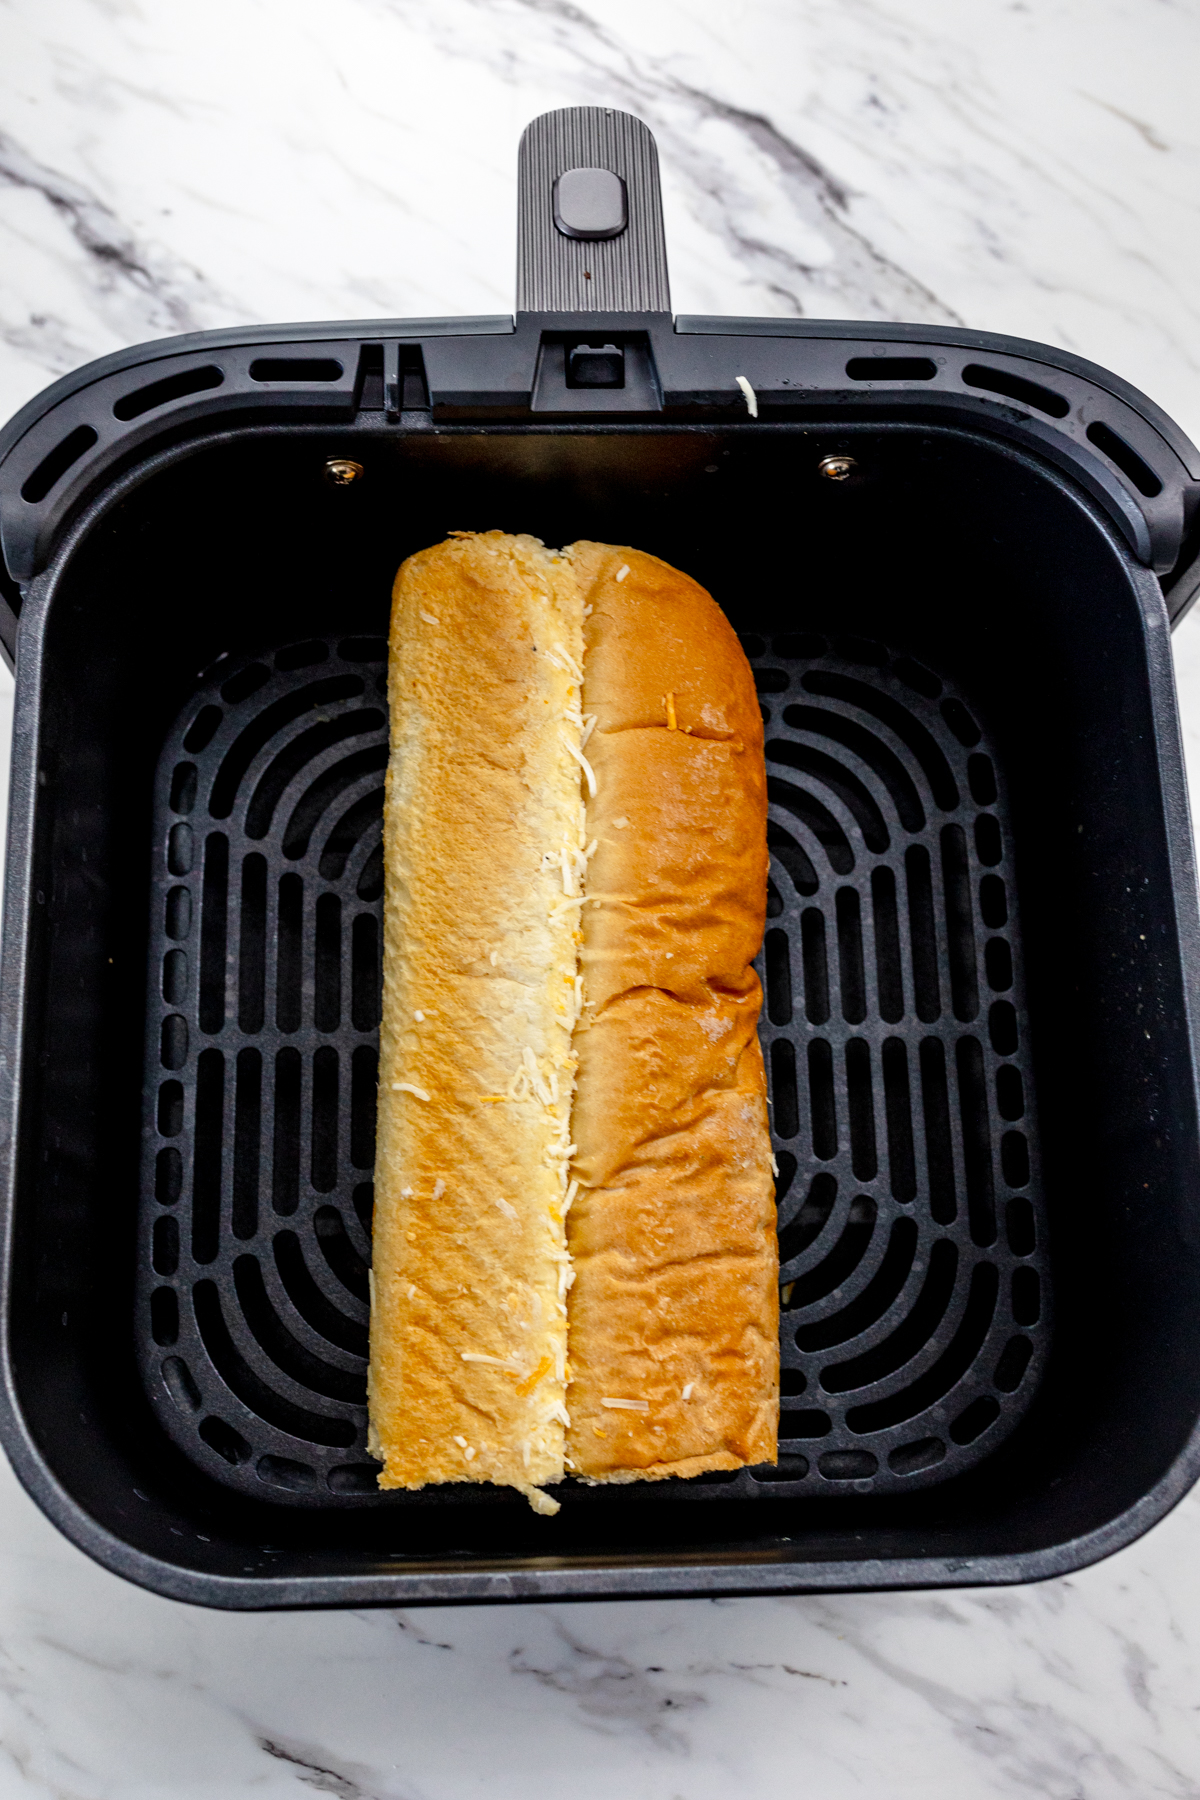 Top view of a garlic bread loaf in an air fryer basket.